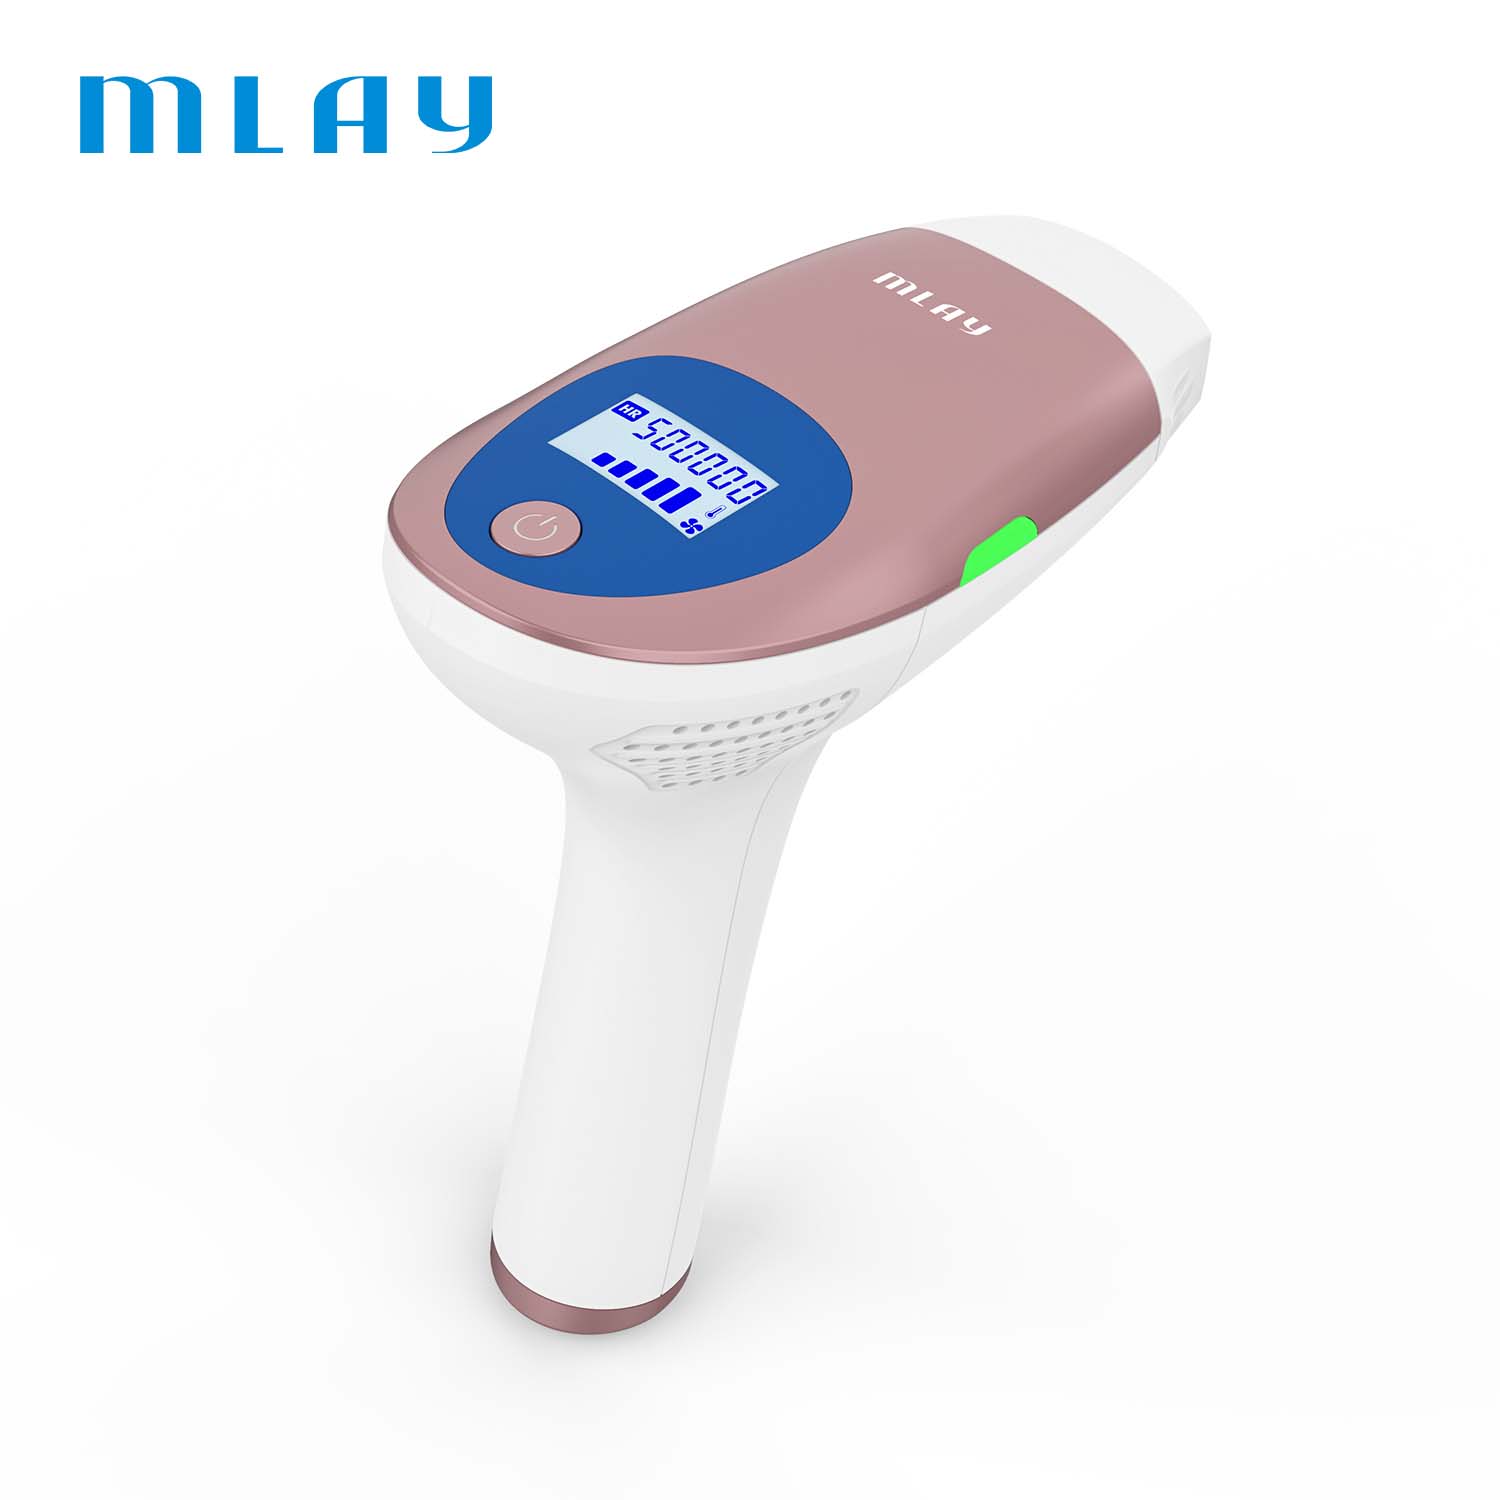 new products home use laser ipl hair removal device portable ipl laser hair removal for home